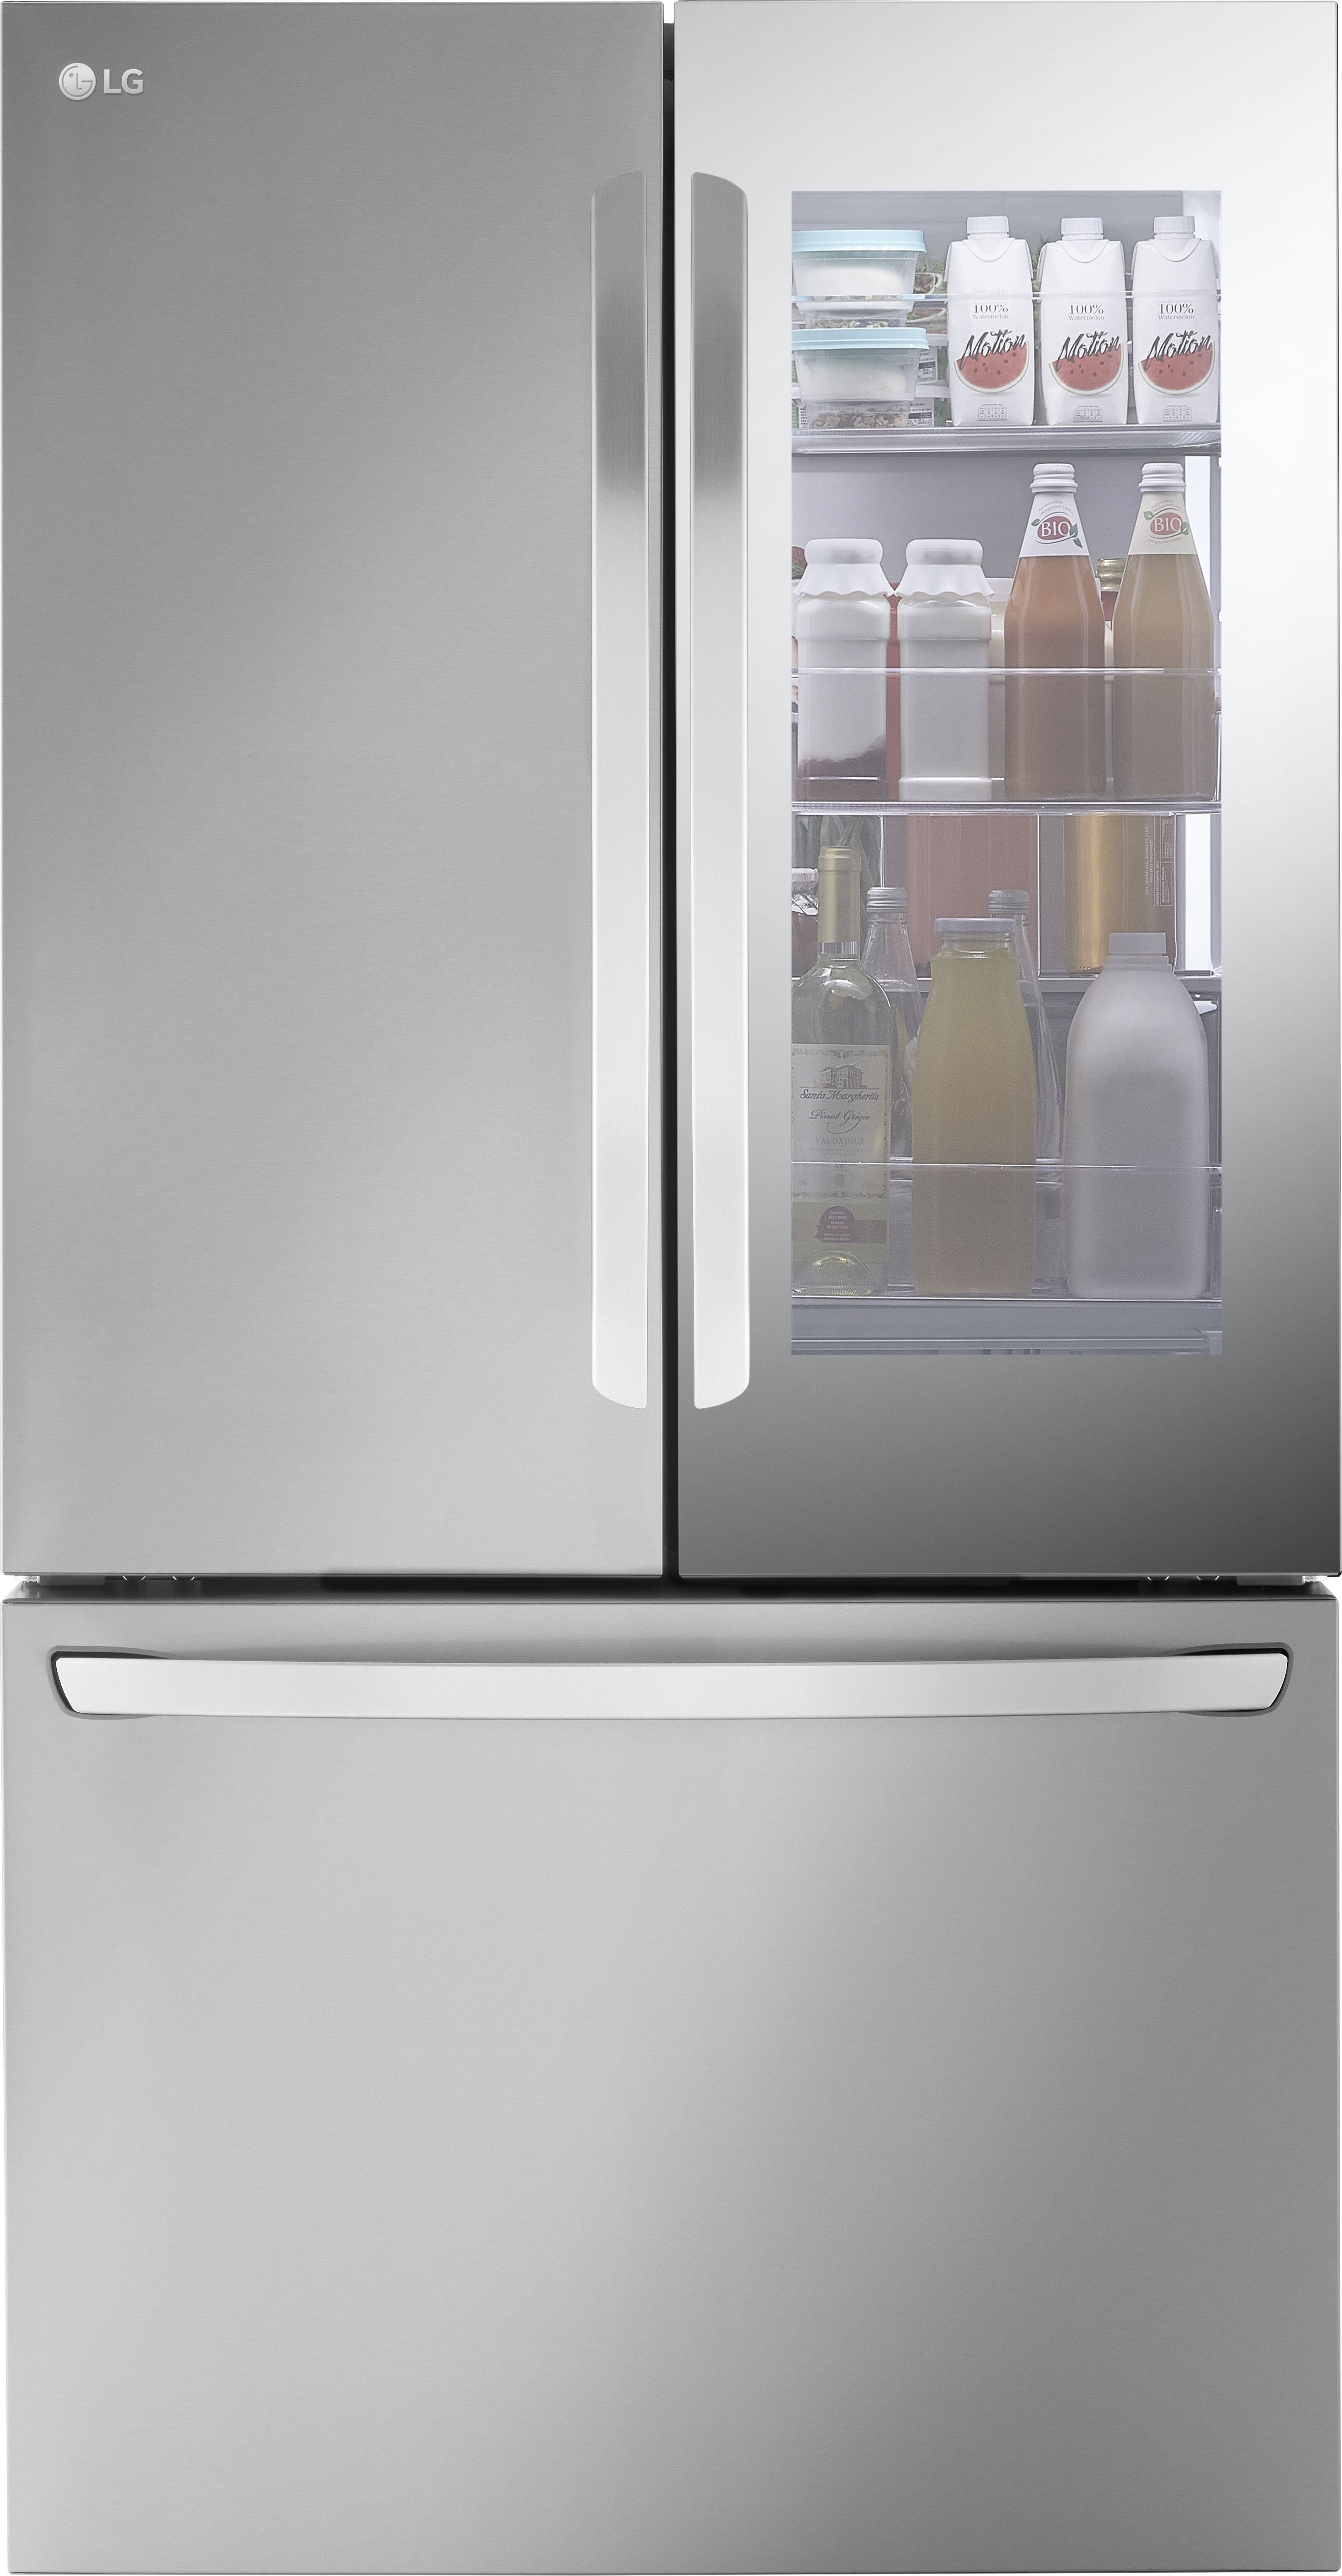 LG InstaView GMZ765STHJ Wifi Connected Plumbed Frost Free American Fridge Freezer - Stainless Steel - E Rated, Stainless Steel